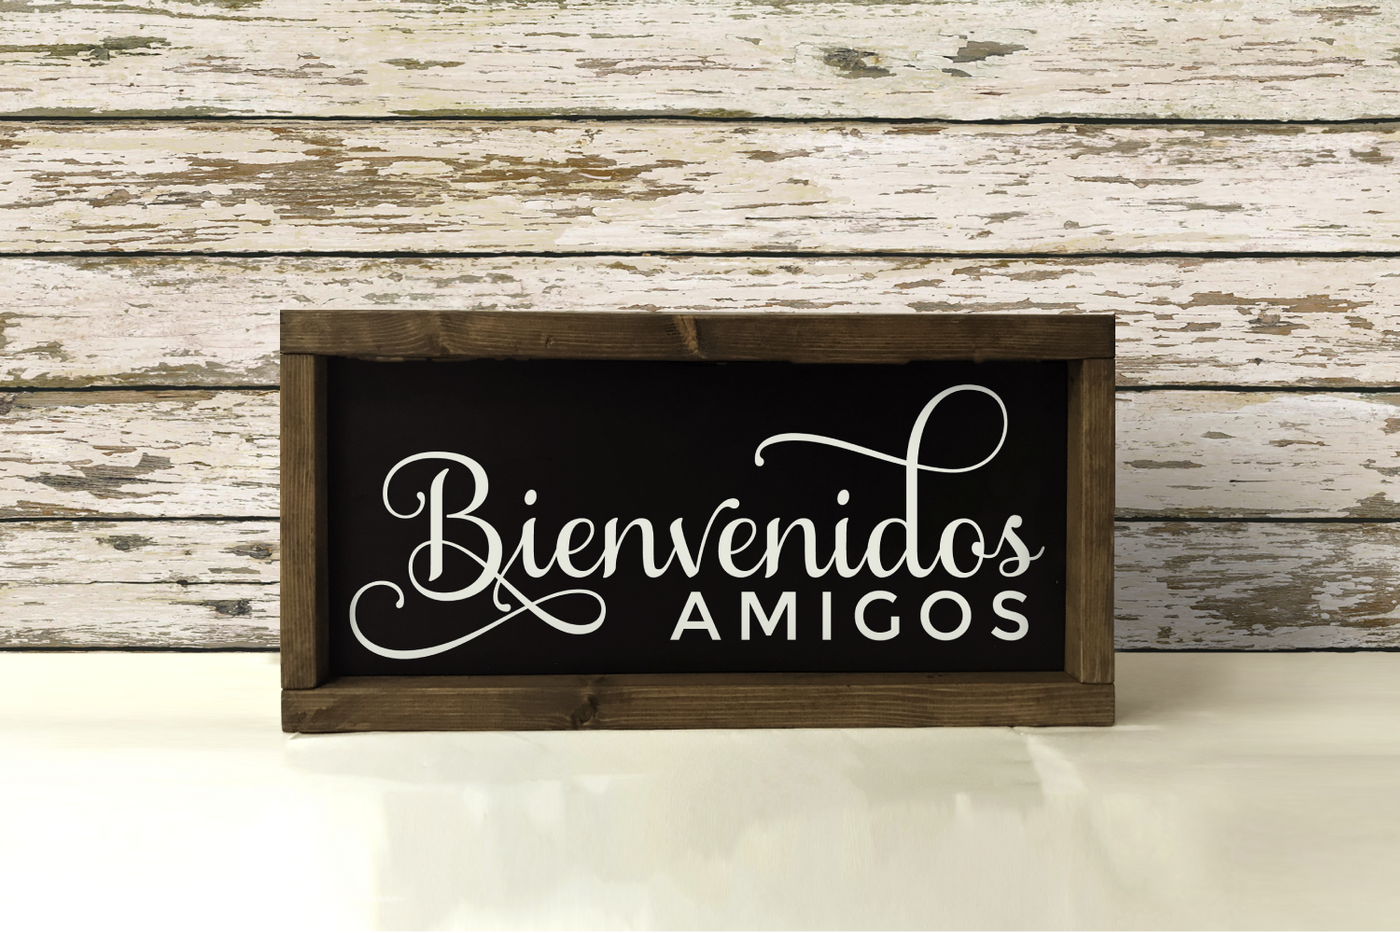 A wood framed sign that is black with white letters. The sign says "Bienvenidos amigos."